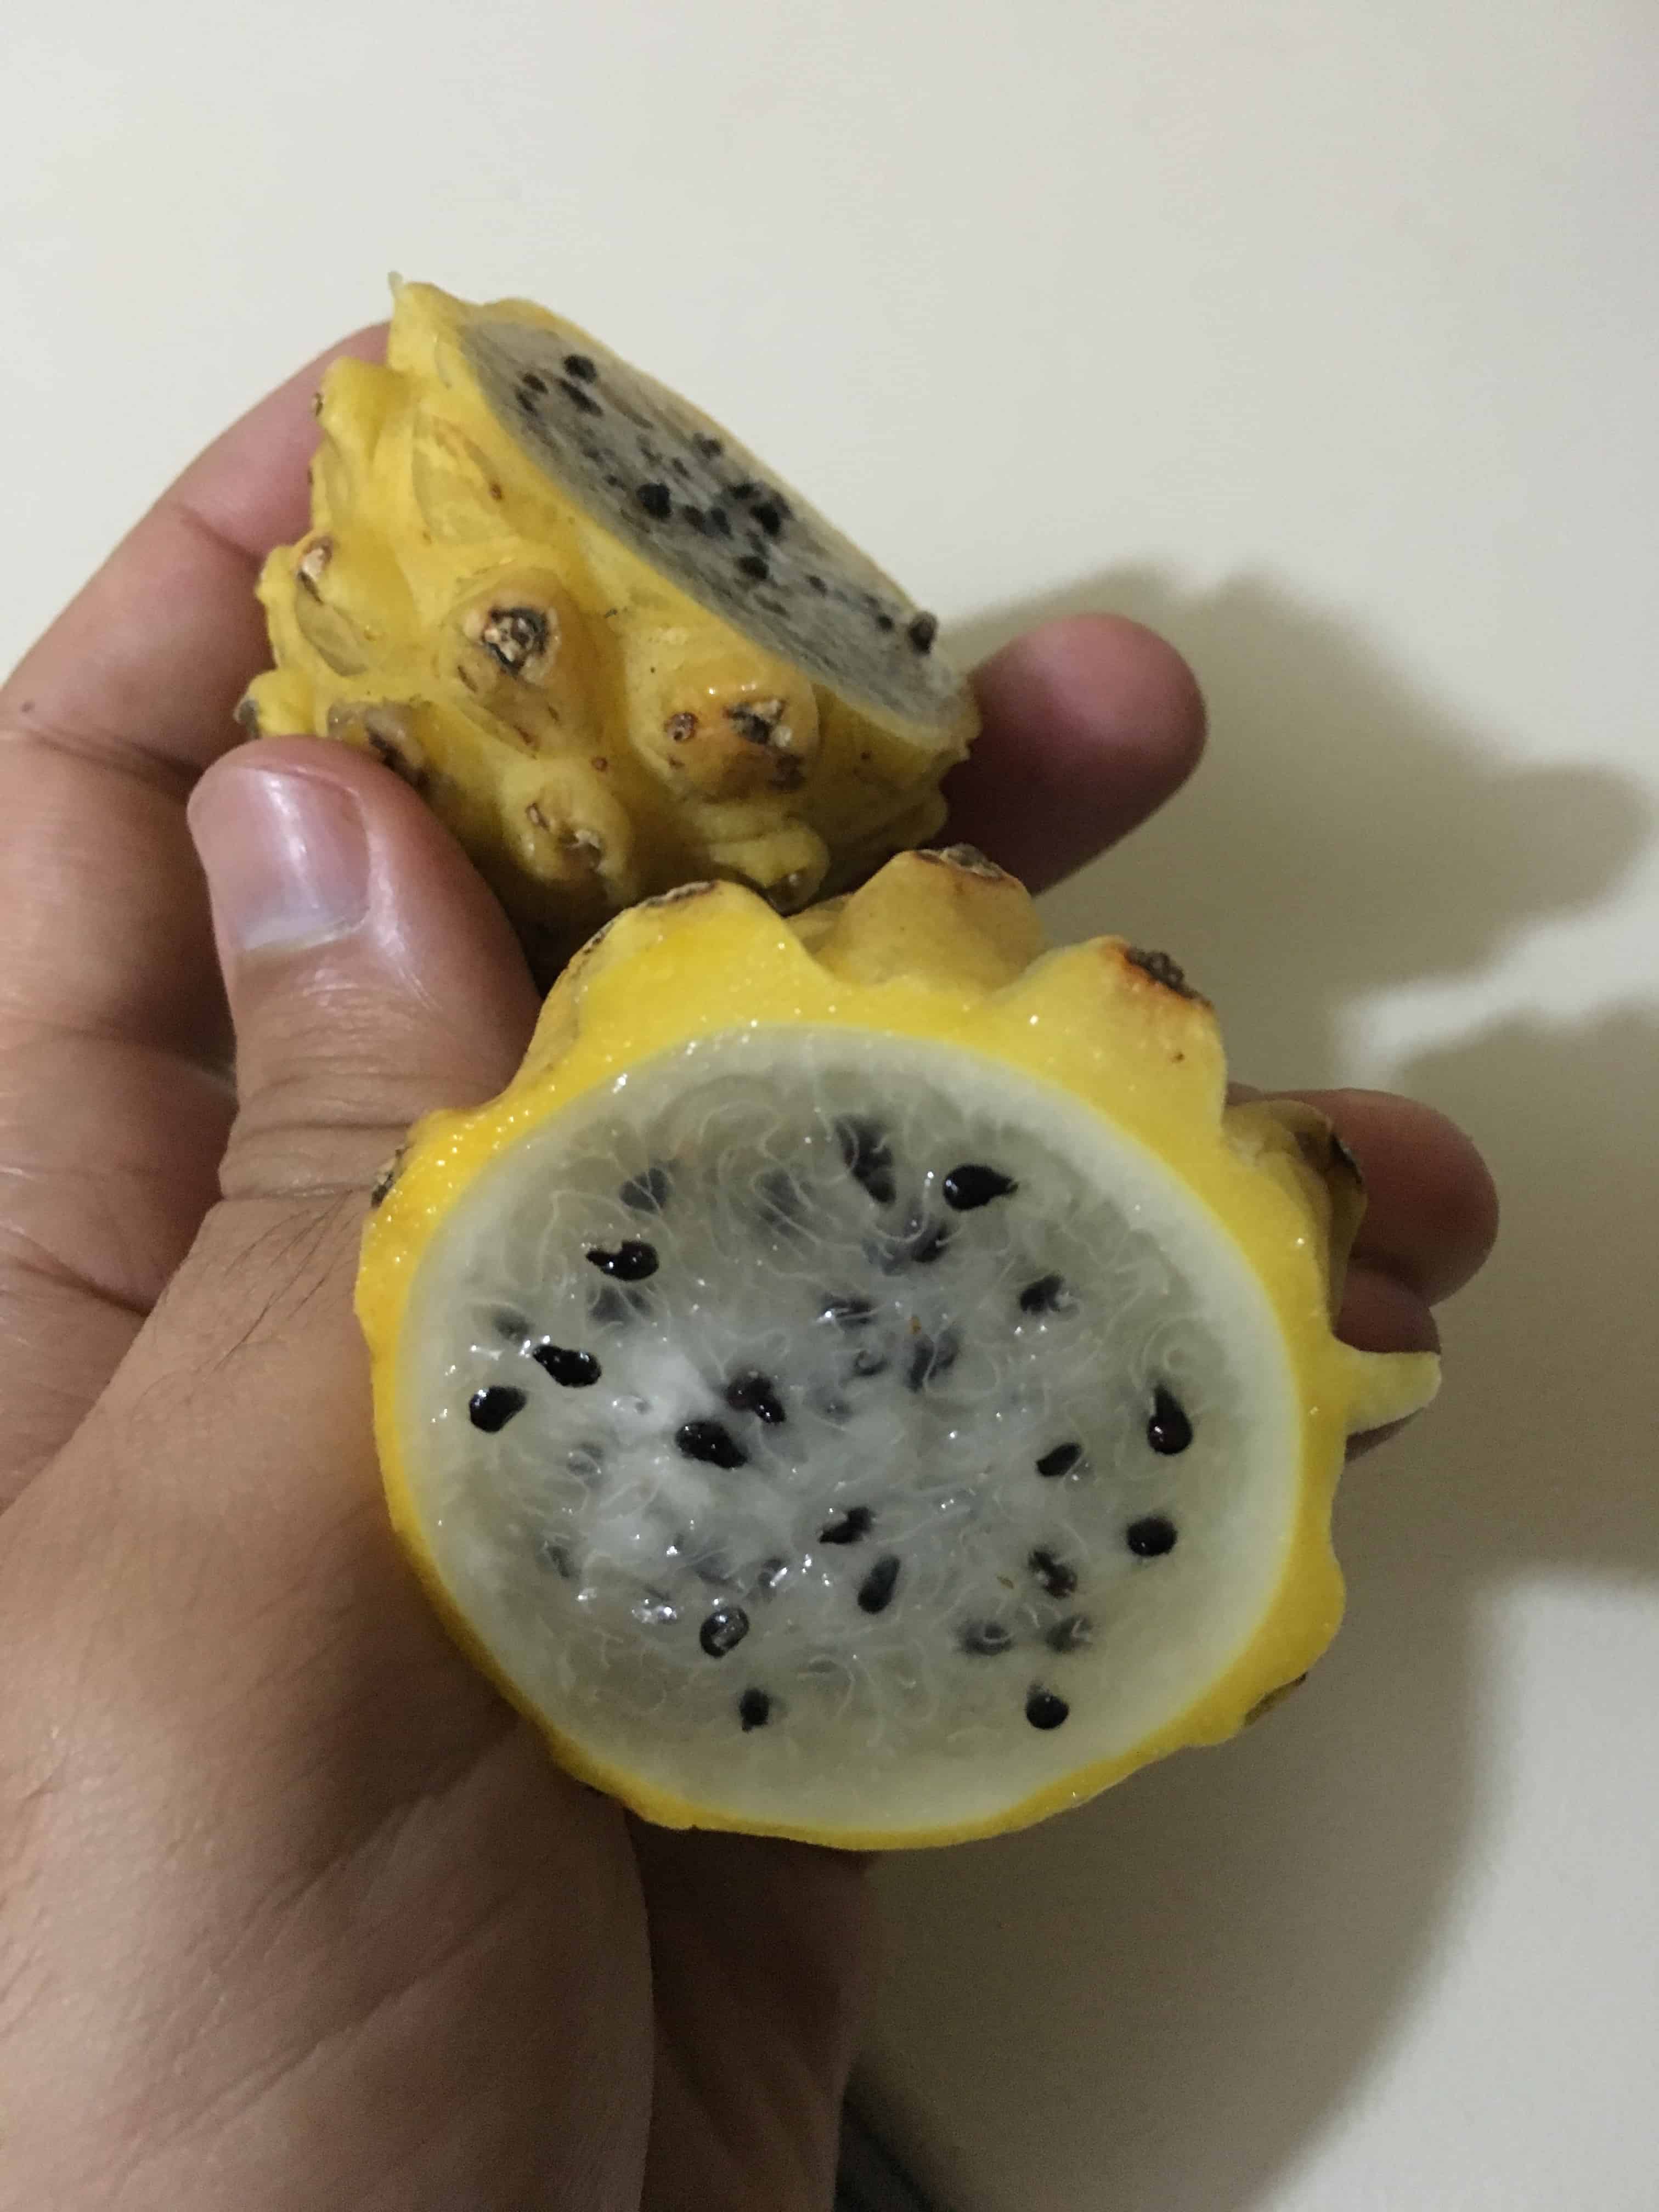 Pitahaya Fruit in Colombia